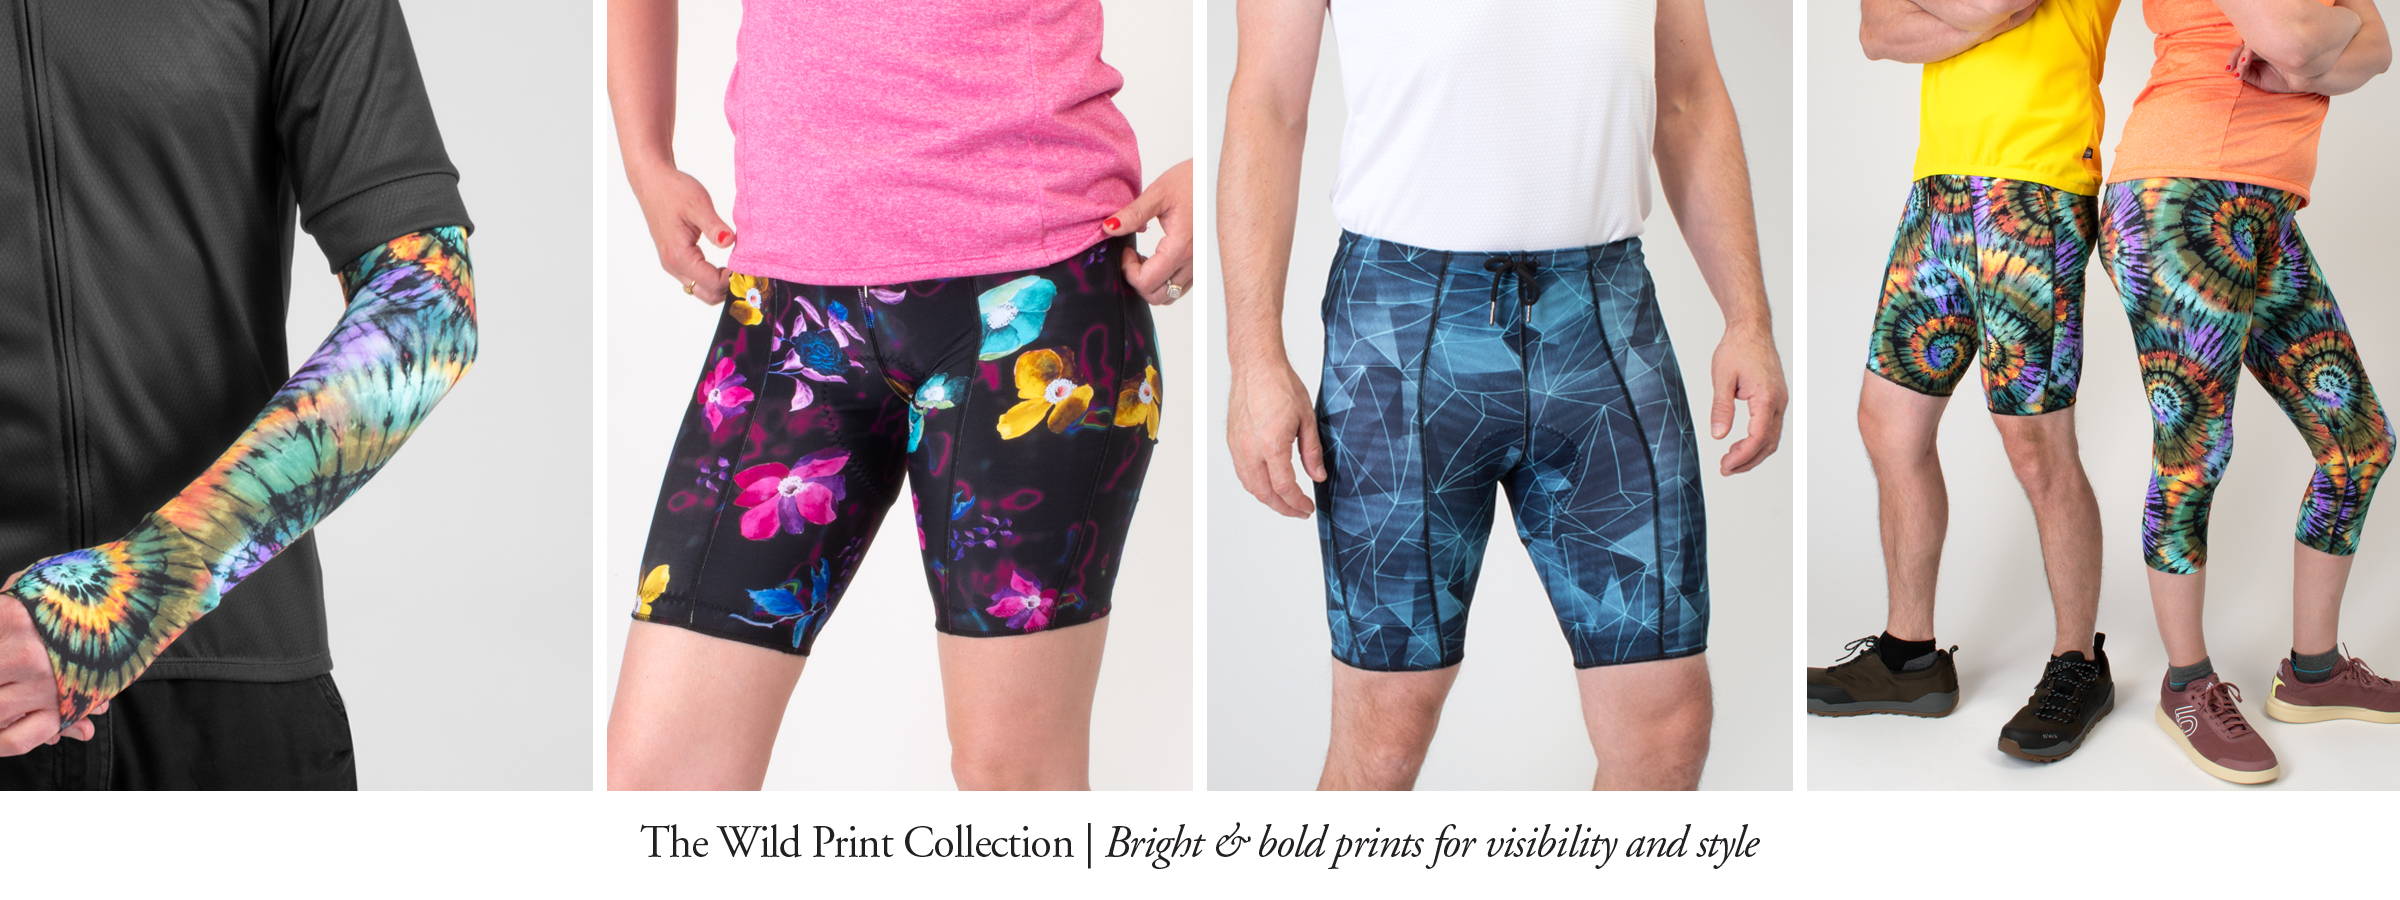 Wild Print Cycling Apparel Collection, Sun Sleeves, bike shorts, women's capris, and tights